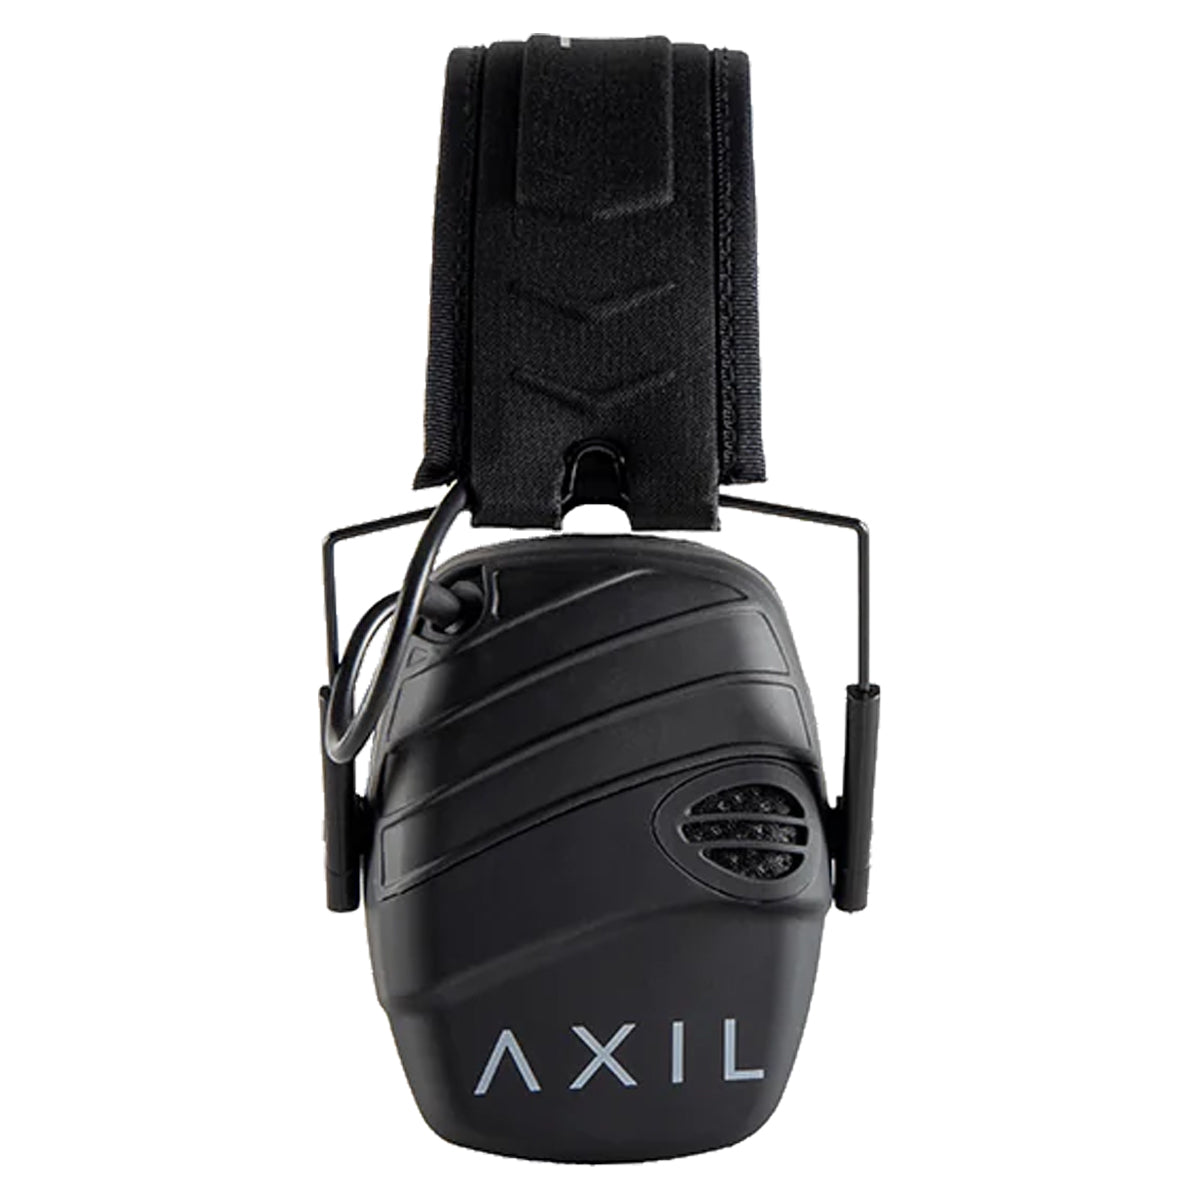 Axil Trackr Electronic Ear Muffs in  by GOHUNT | Axil - GOHUNT Shop